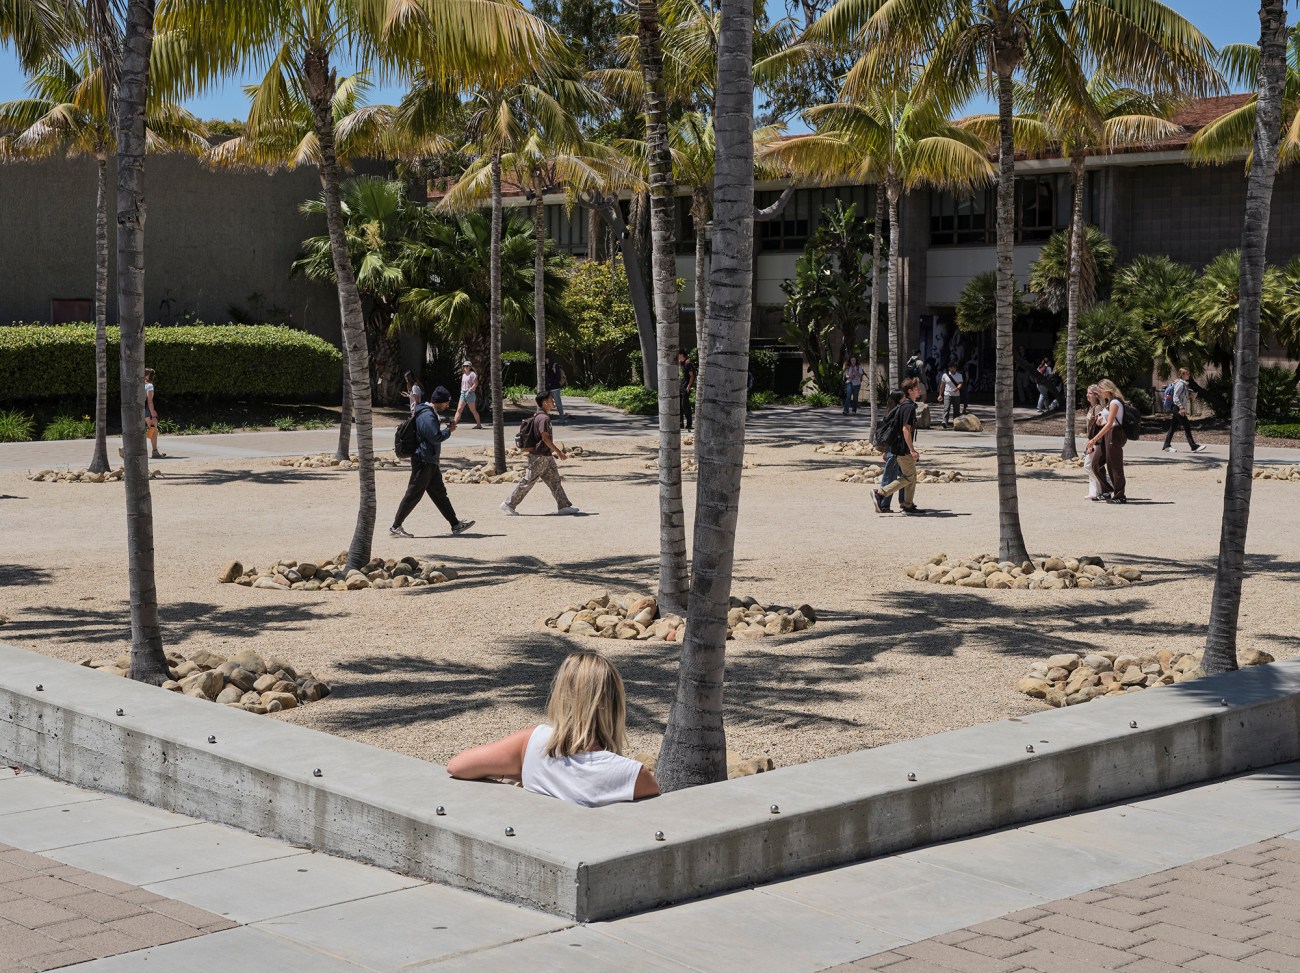 A woman sits among a grouping of palm trees while other people walk in the distance.